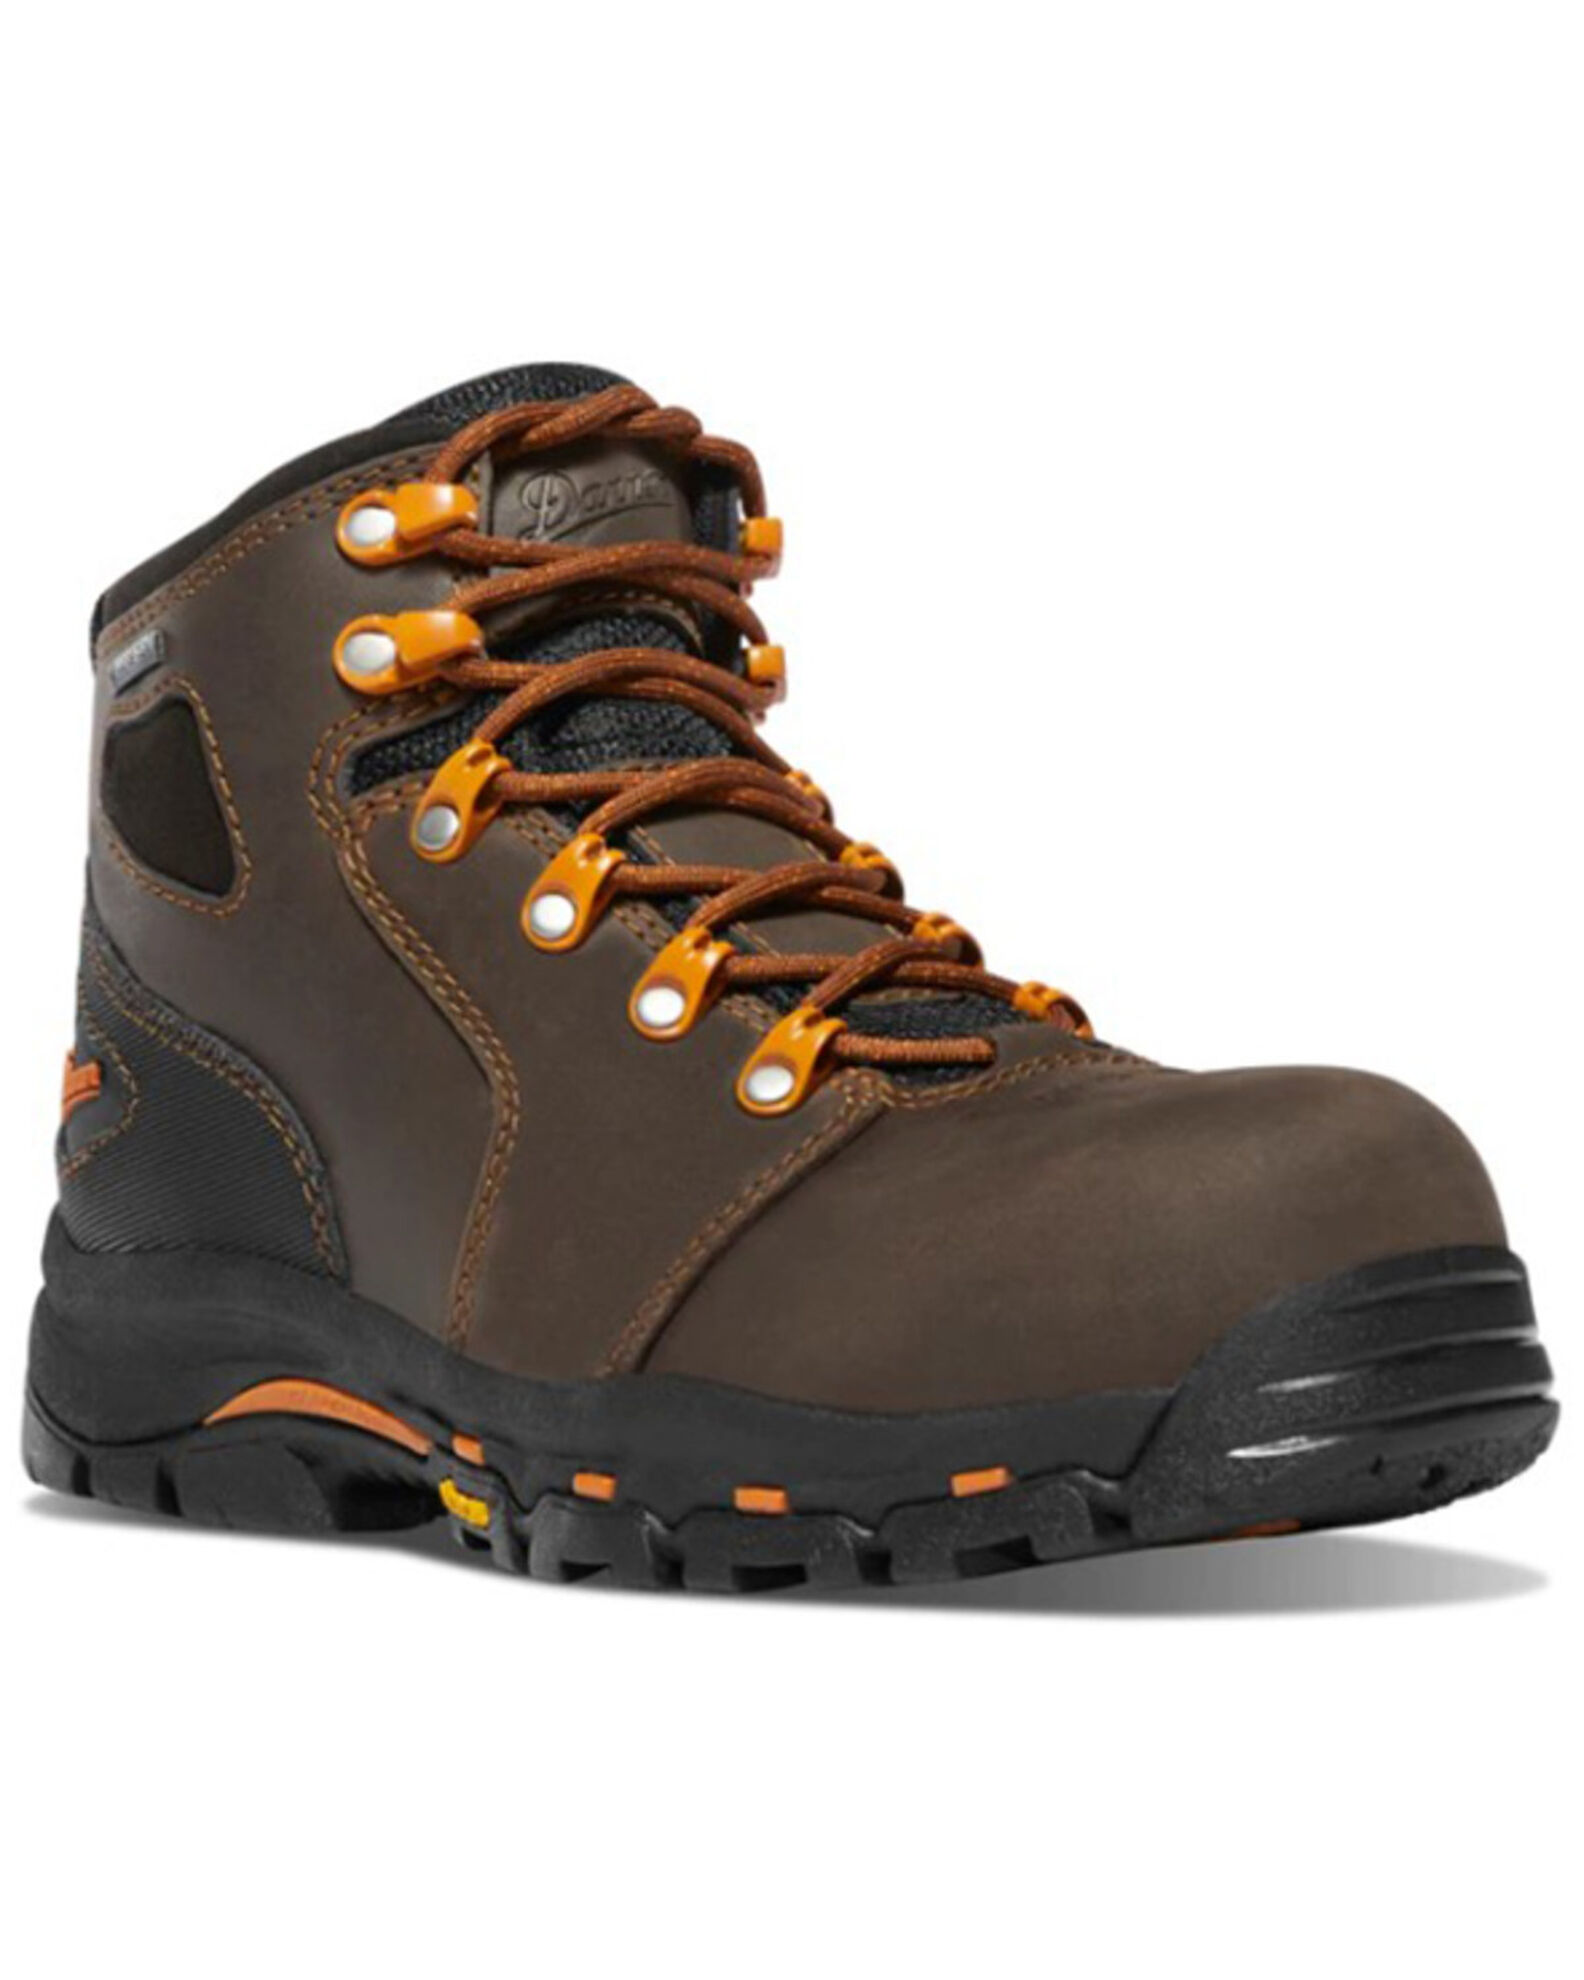 Danner Women's Vicious Work Waterproof Lace-Up Boots - Composite Toe